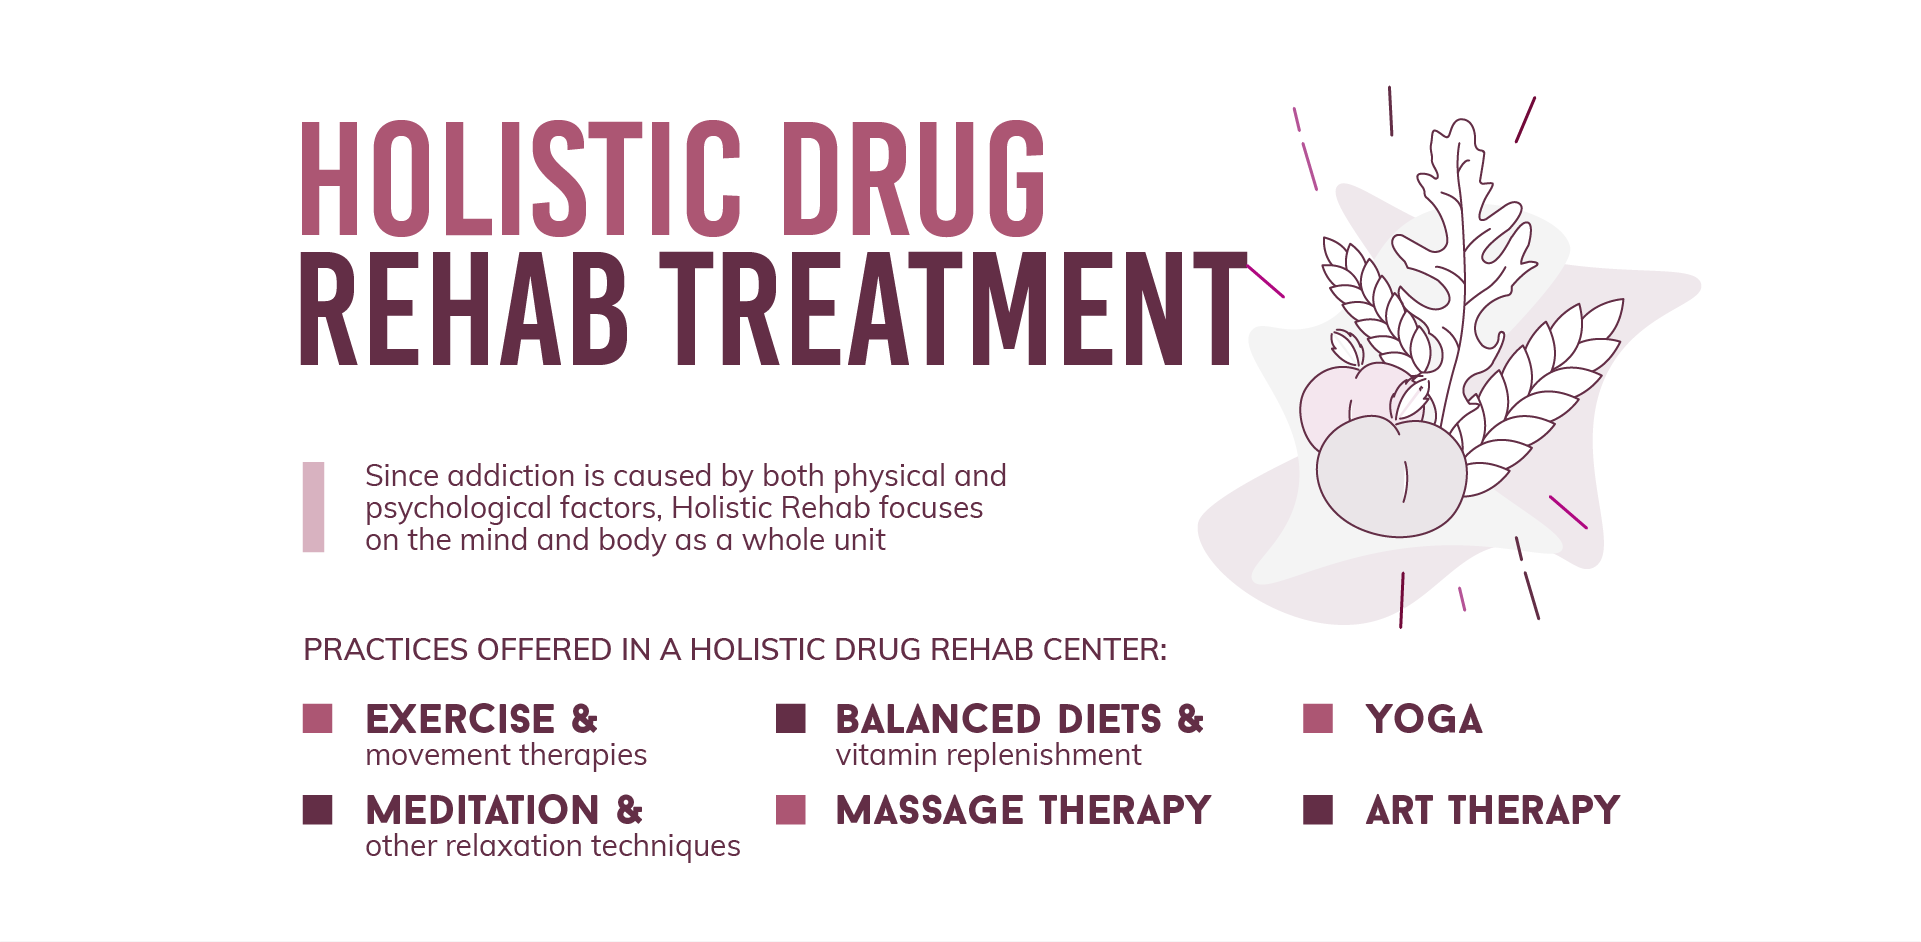 Since addiction is caused by both physical and psychological factors, "Holistic Rehab" focuses on the mind and body as a whole unit, practices offered in a holistic drug rehab center are, exercise and movement therapies, meditation and other relaxation techniques, balanced diets and vitamin replenishment, massage therapy, yoga and art therapy